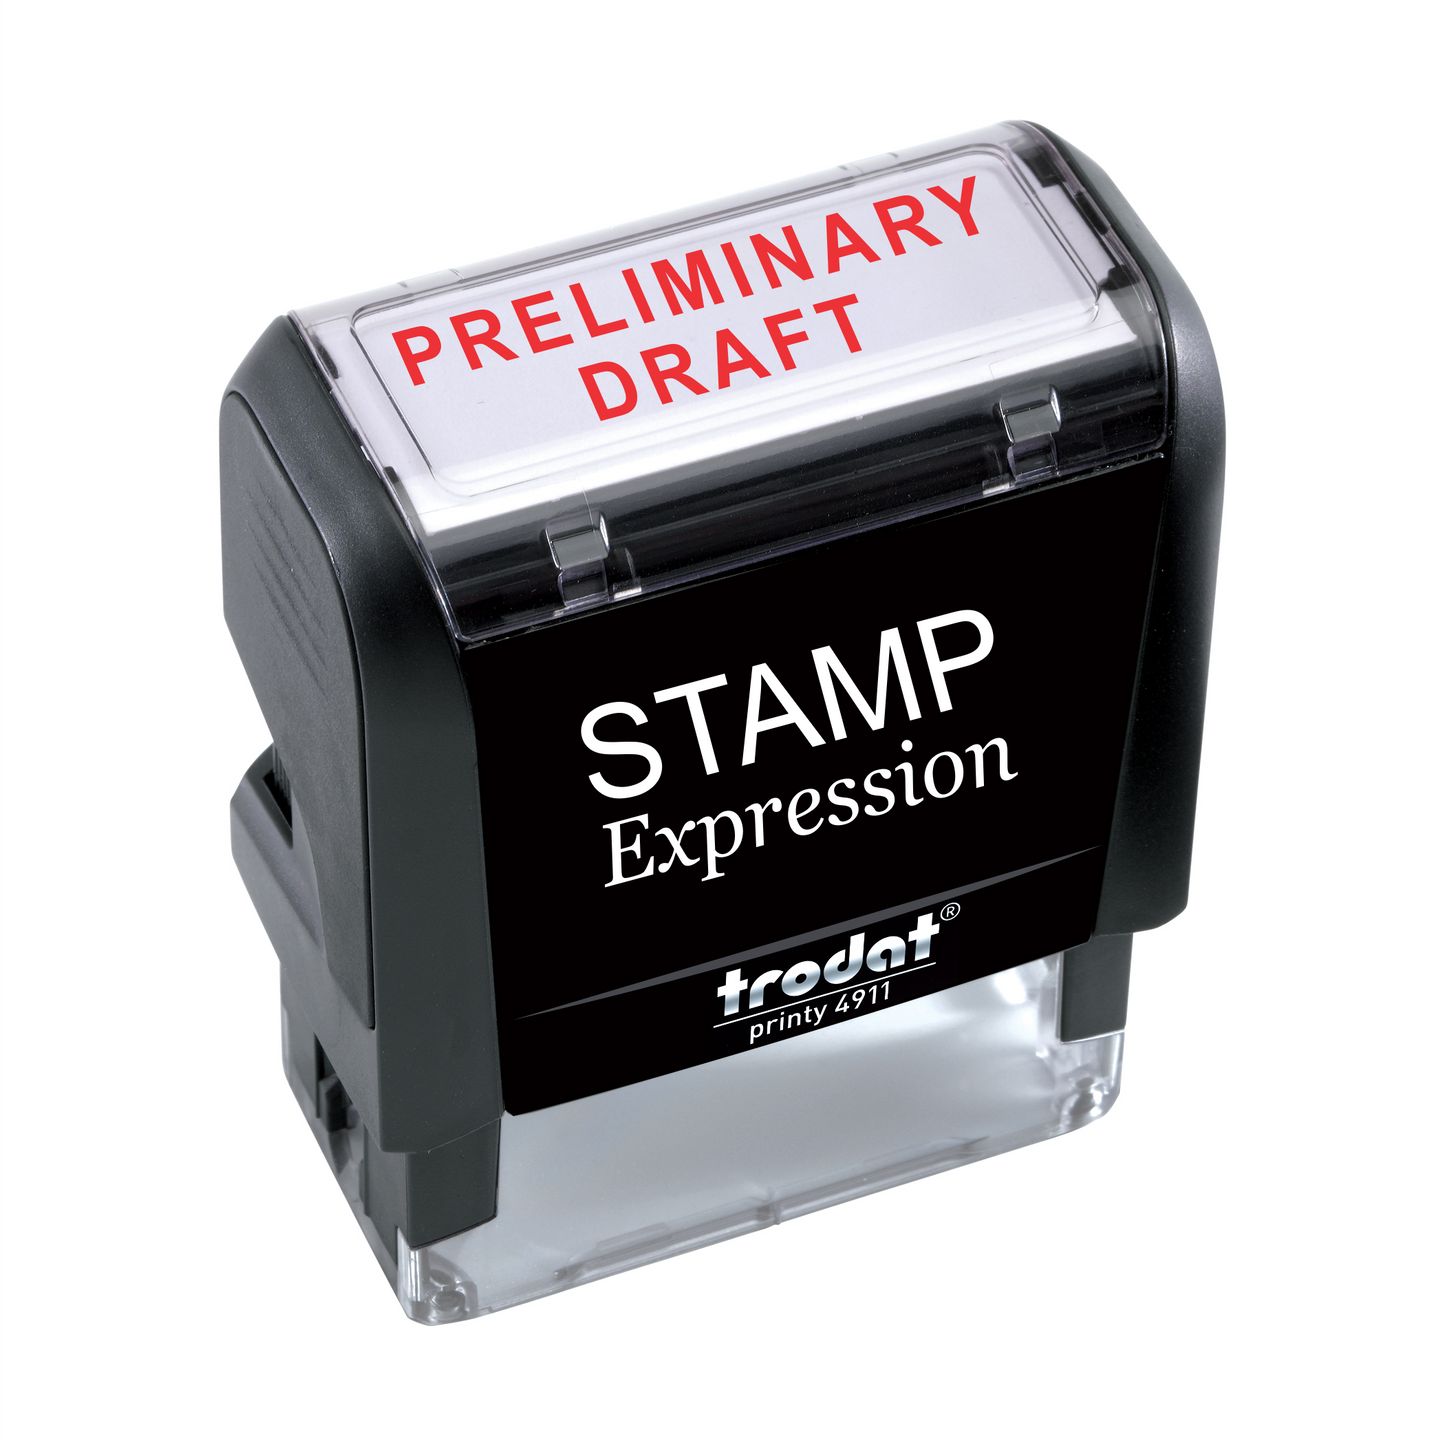 Preliminary Draft Office Self Inking Rubber Stamp (SH-5589)